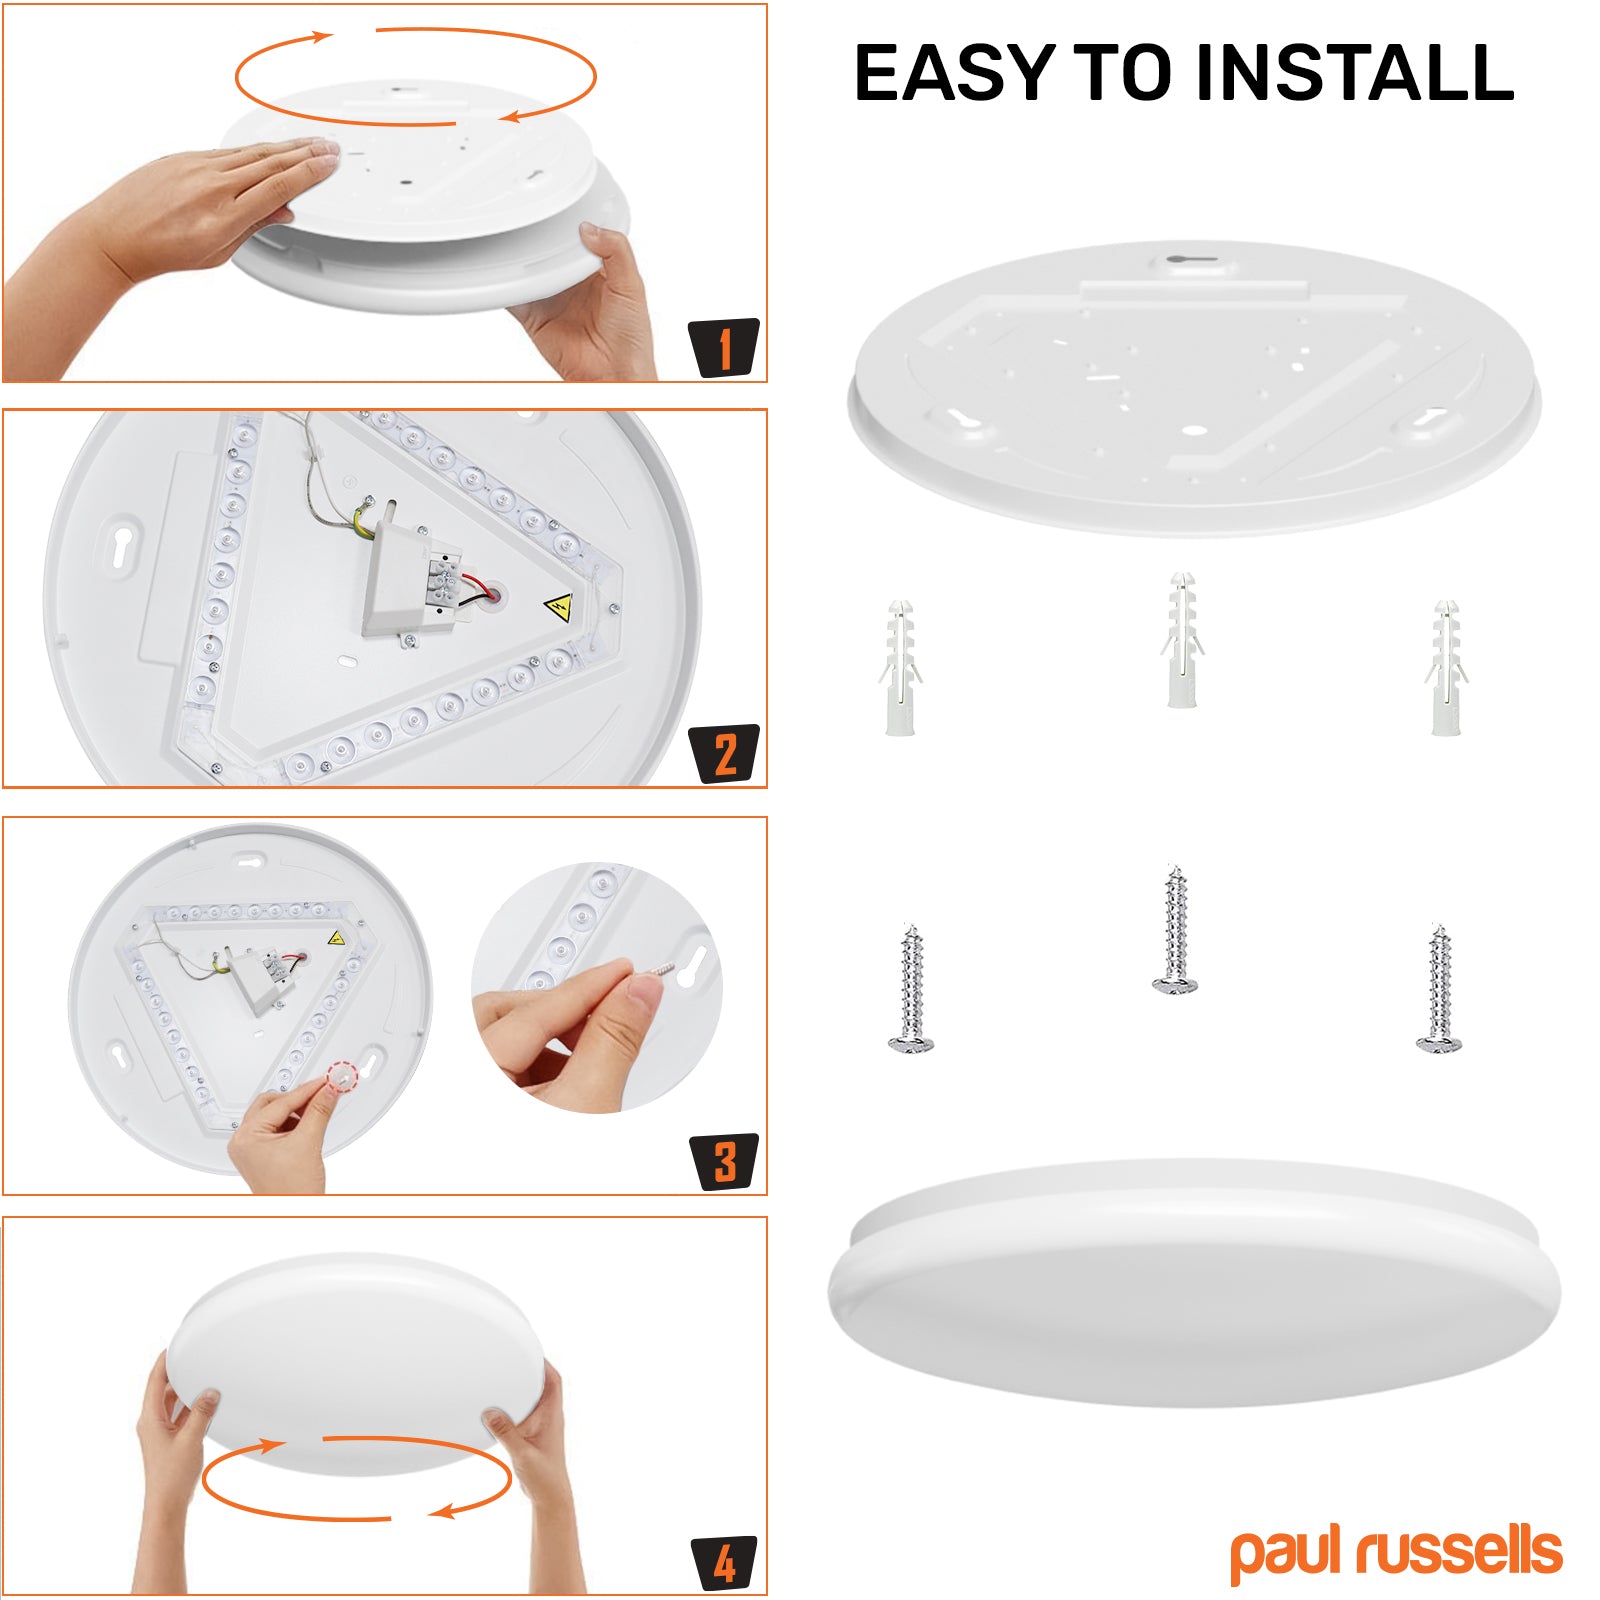 17W, LED Round Ceiling Downlights, 100W Equivalent, IP20, 1700 Lumens, 6500K Day Light, Non-Dimmable Panel Spotlights